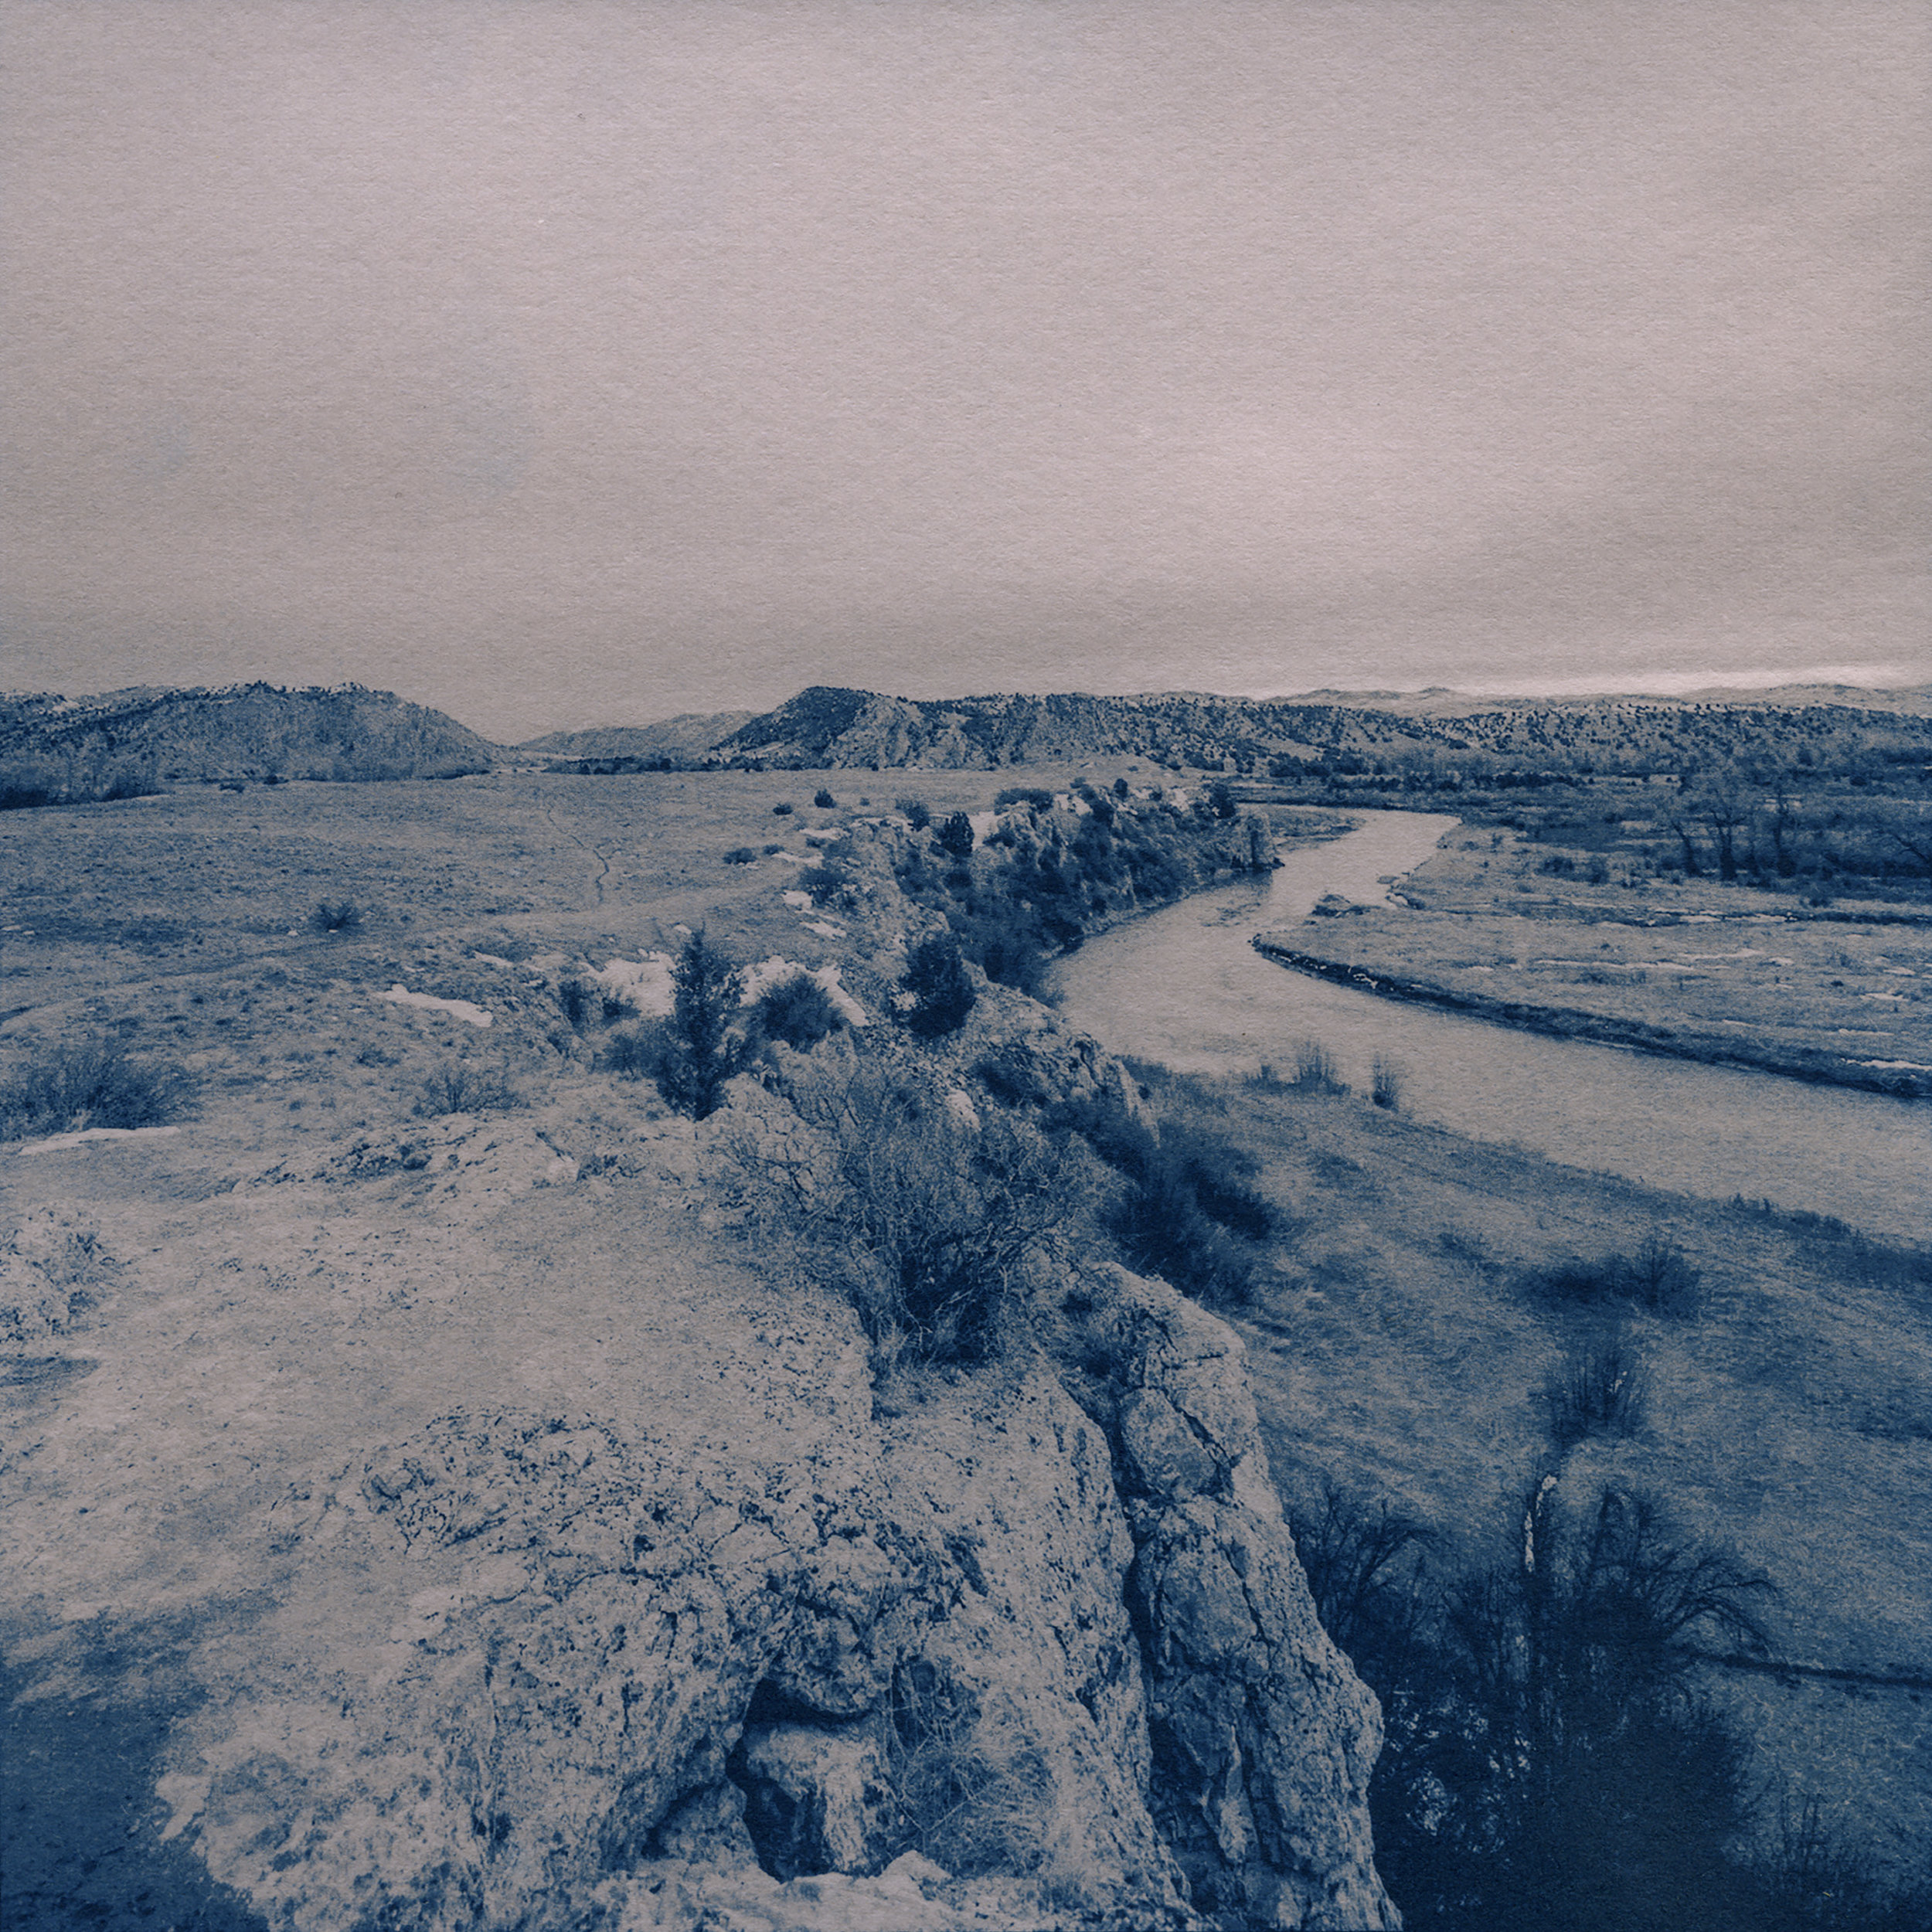  New Cyanotype, toned  6x6” print  $115.00 unframed, archival mat  Please inquire for purchasing options 